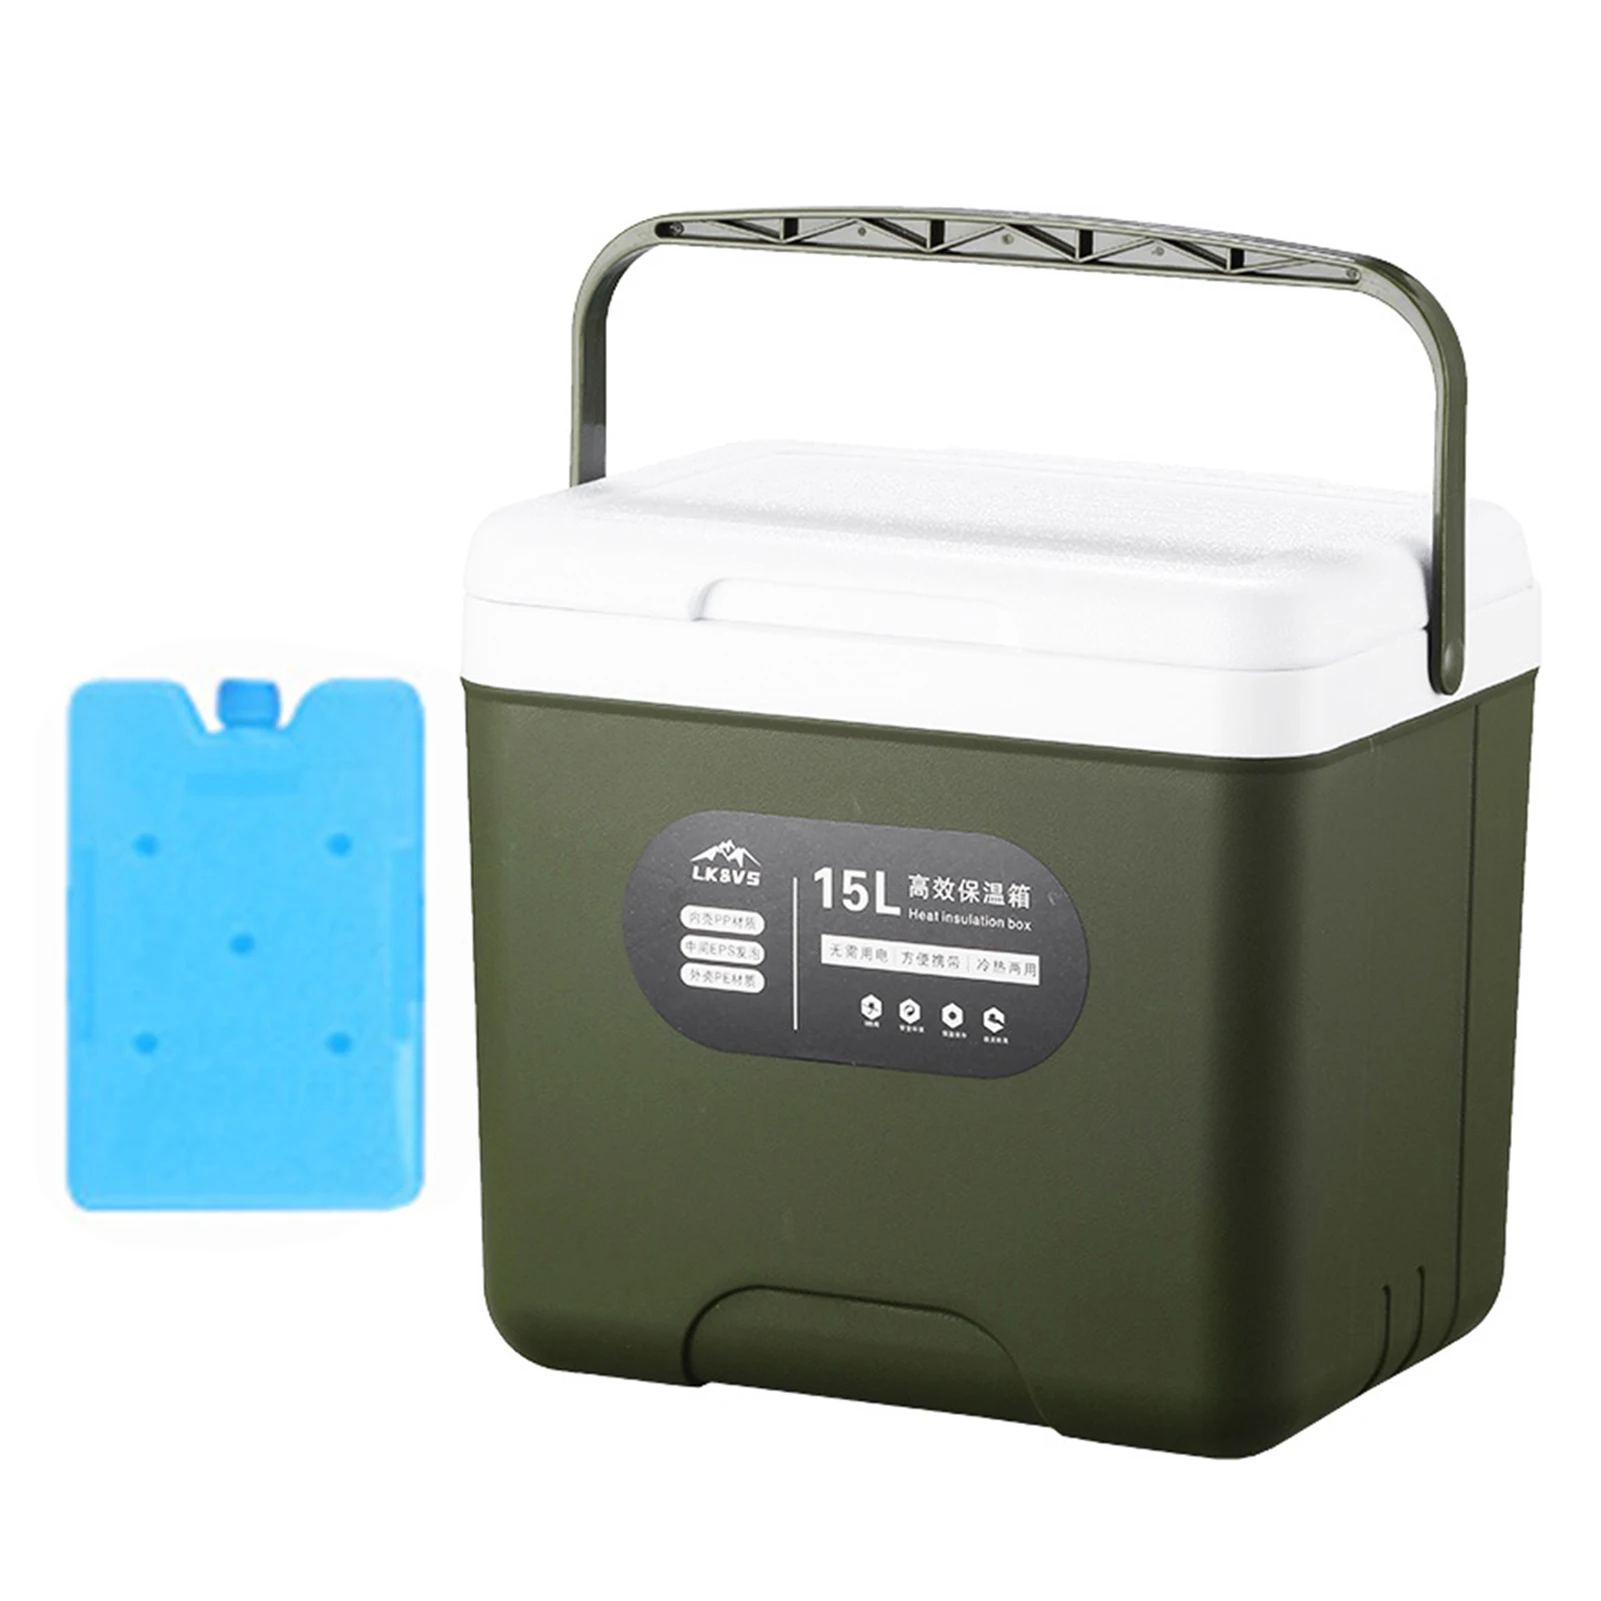 

13.6 QT Ice Coolers Portable Insulated Lunch Box Leak-Proof Food-grade High-capacity Insulation Box For Picnic Beach Work Trip